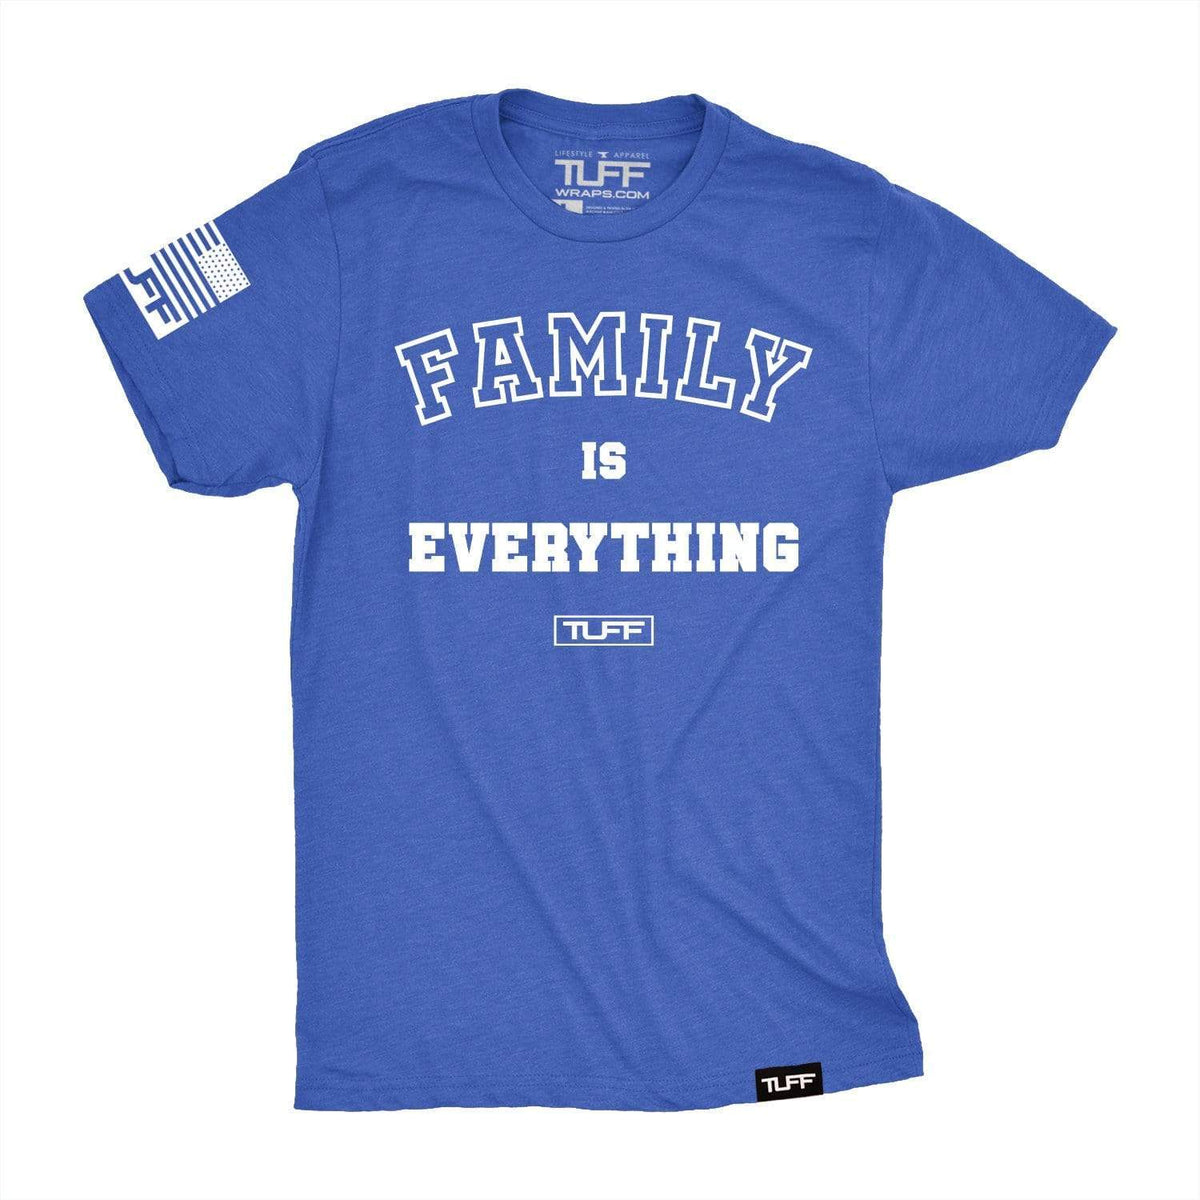 Family Is Everything Tee S / Vintage Blue TuffWraps.com